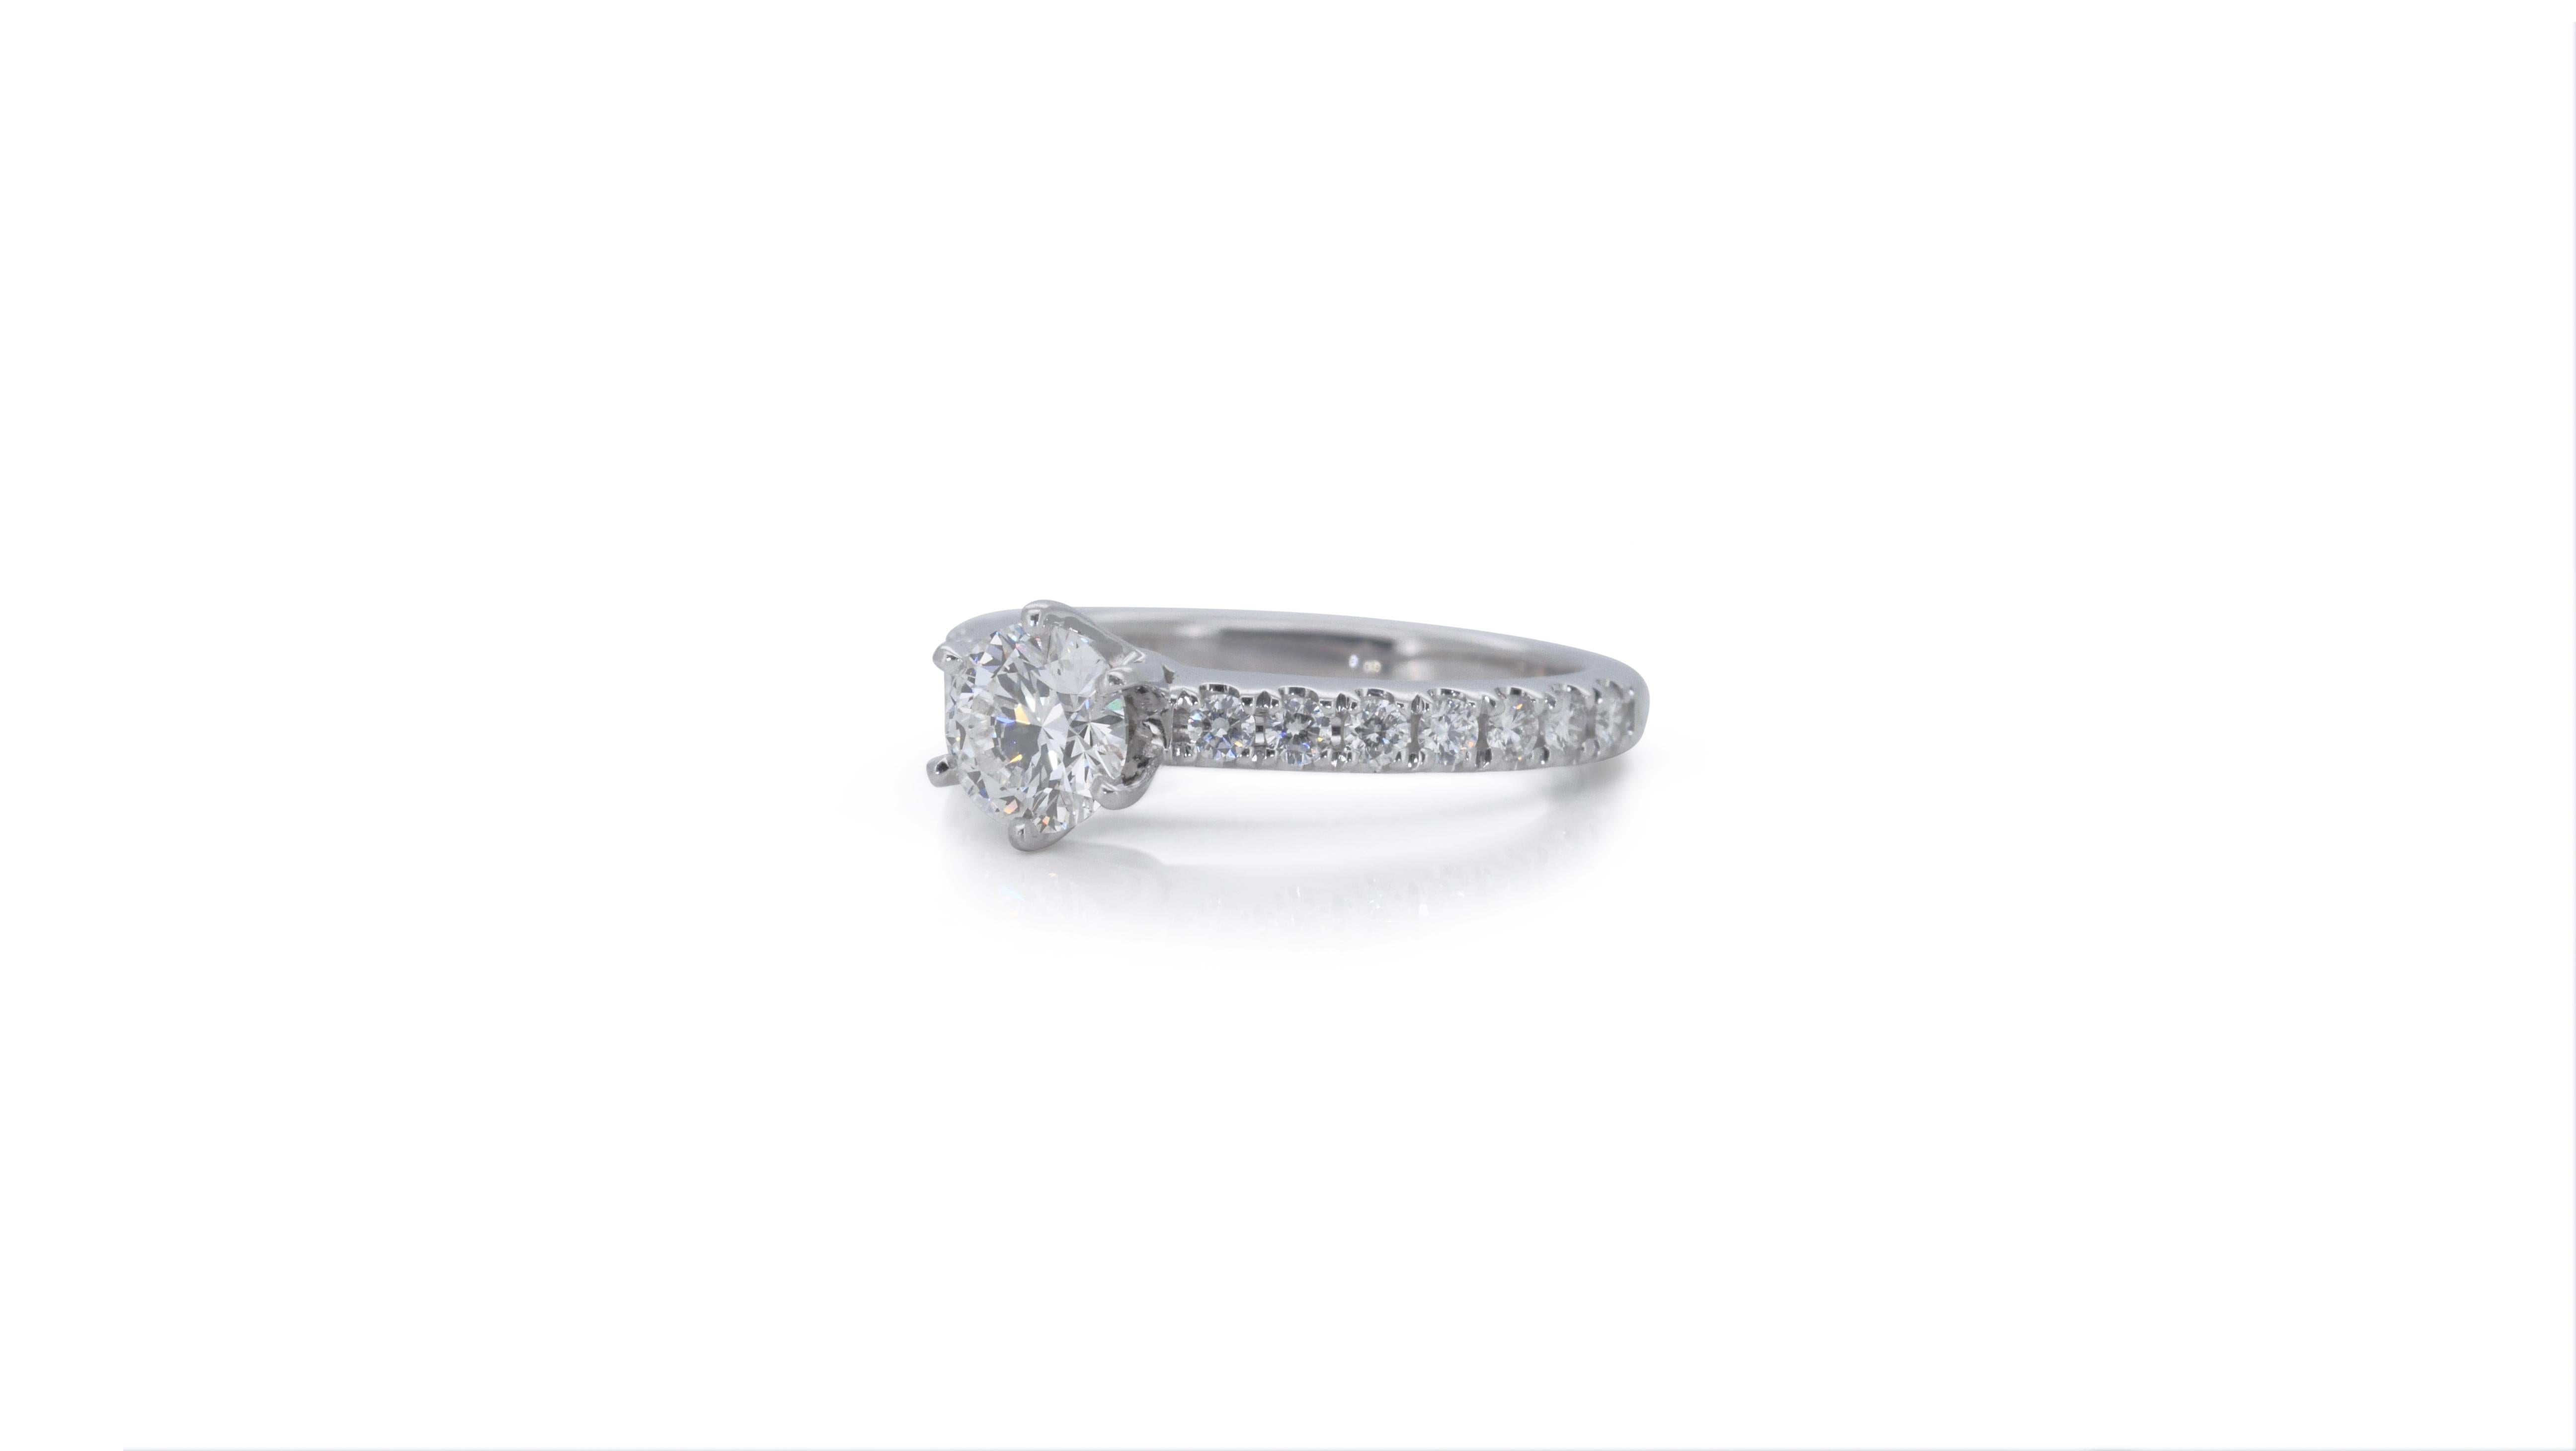 A beautiful pave ring with a dazzling 0.52 carat round brilliant natural diamond. It has 0.21 carat of side diamonds which add more to its elegance. The jewelry is made of 18k White Gold with a high quality polish. It comes with a fancy jewelry